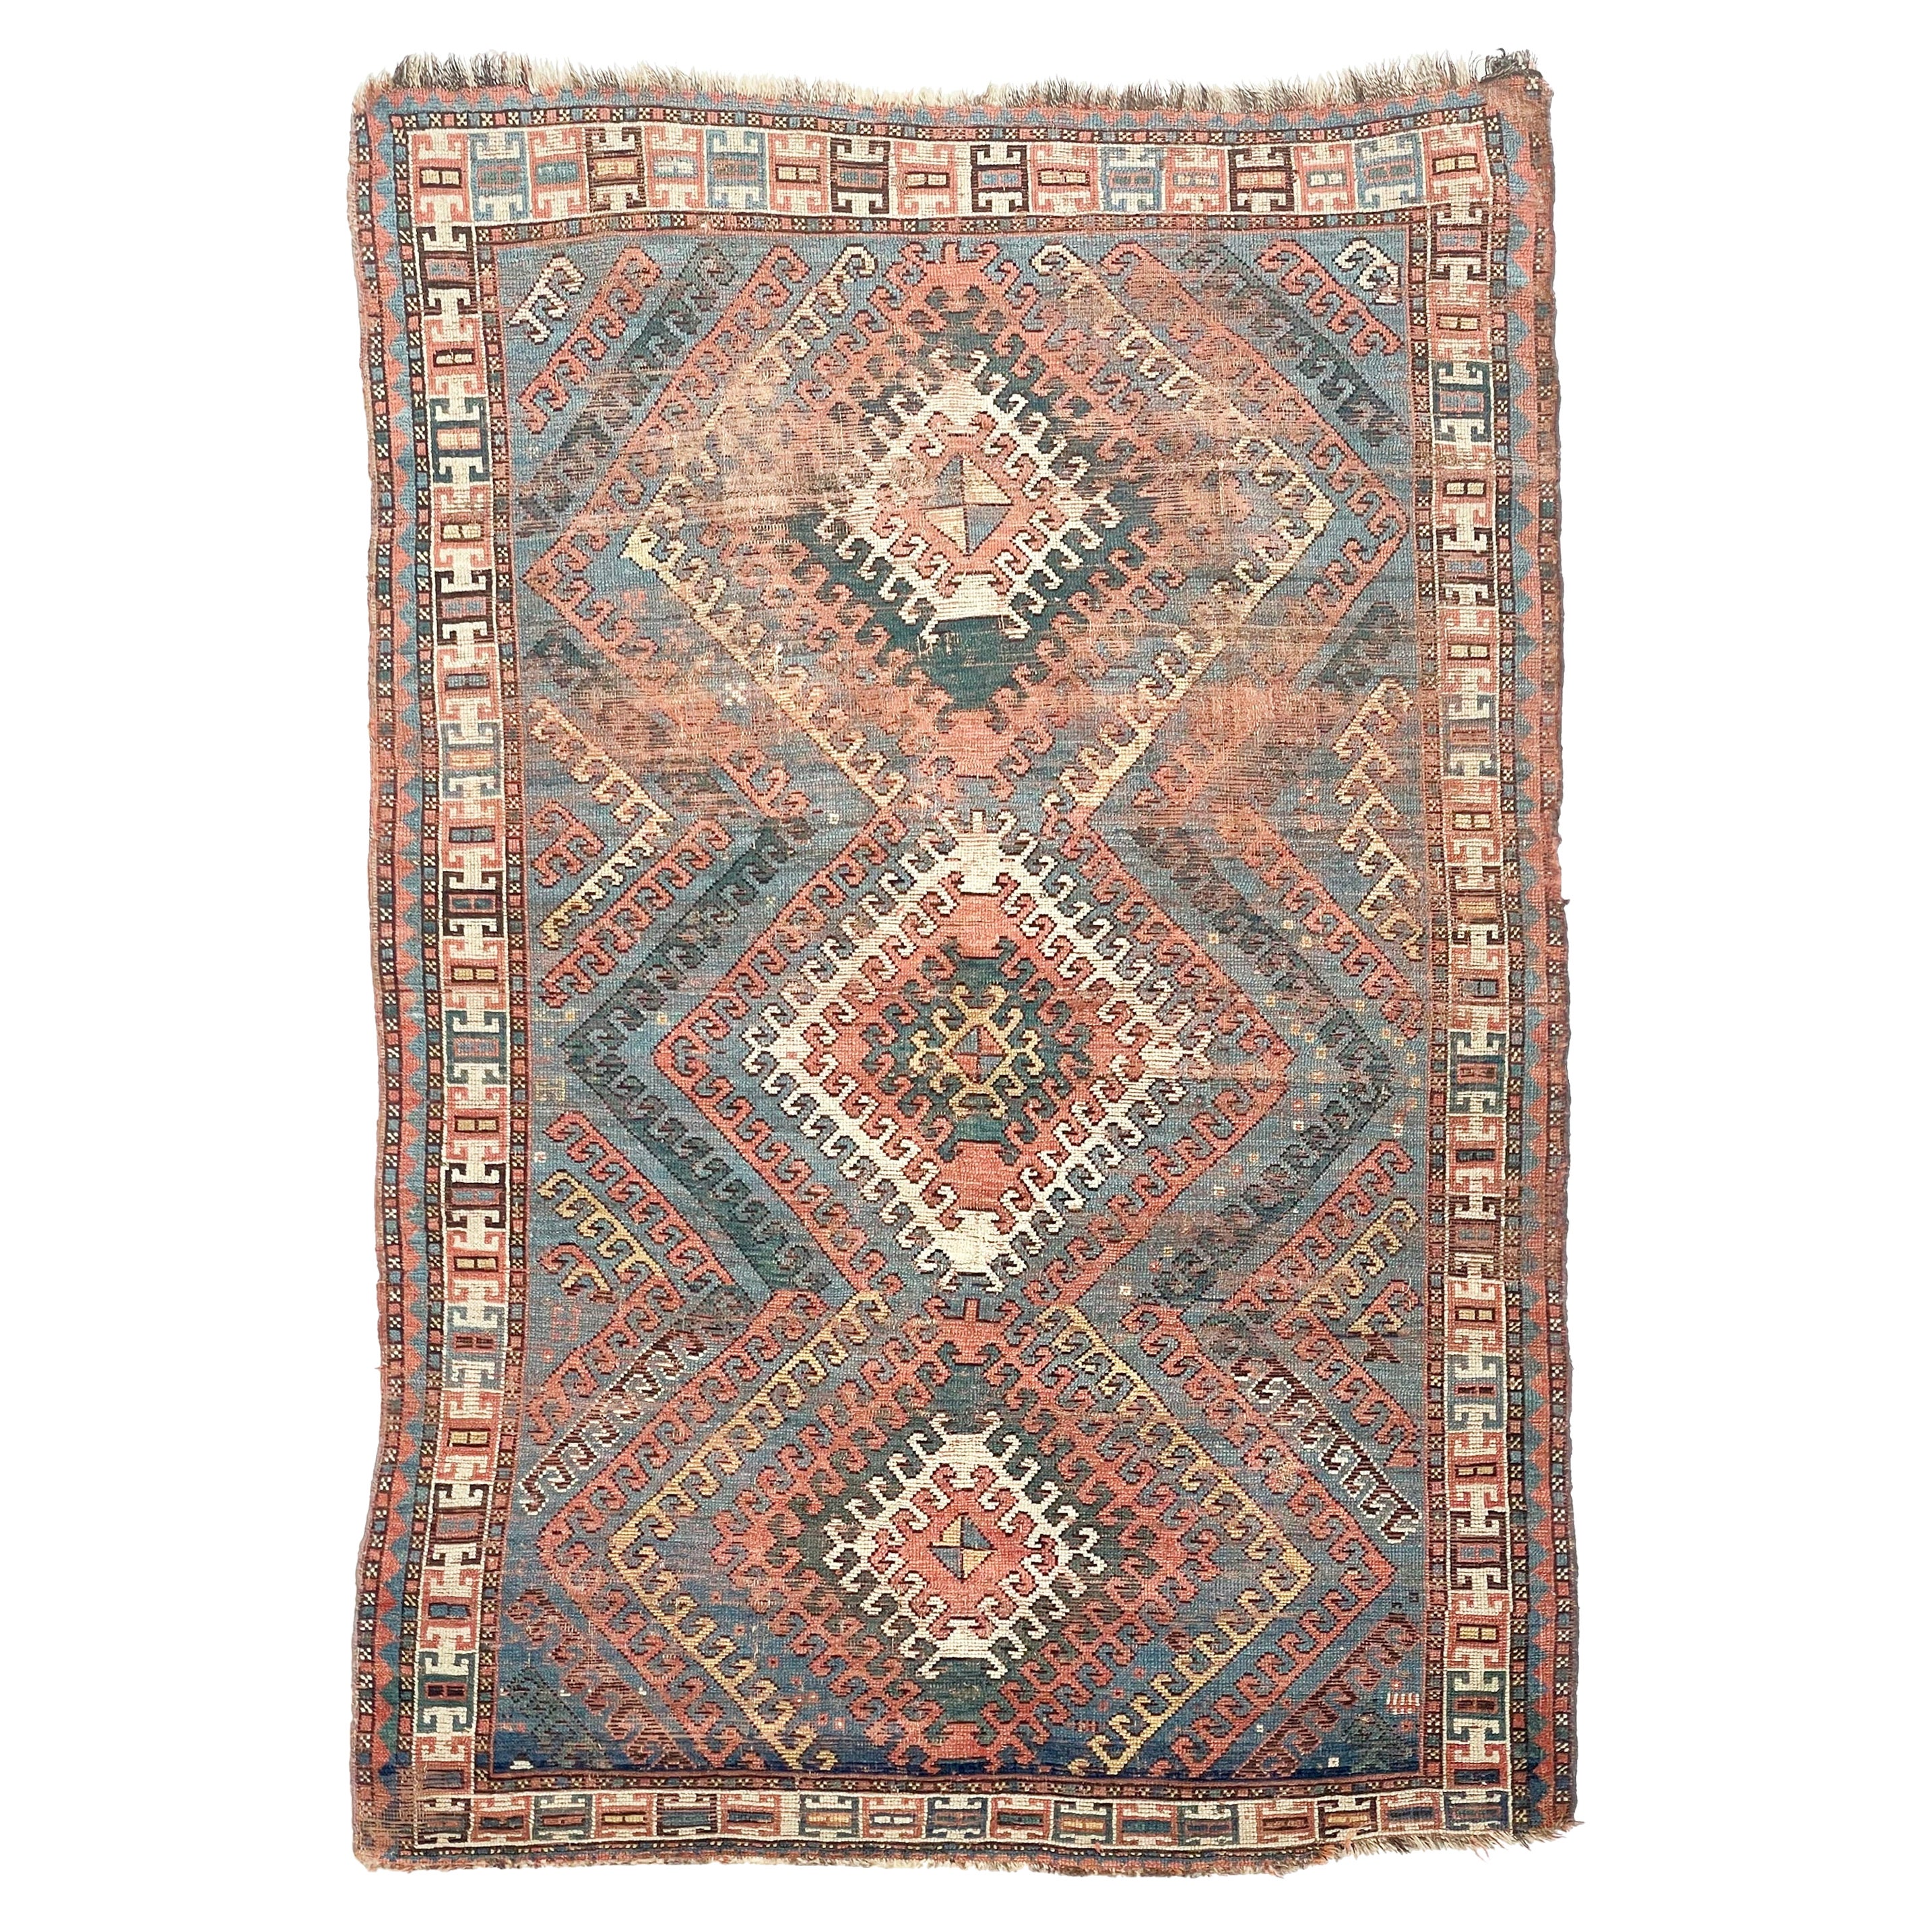 Antique Caucasian Rug with Ram Horn Outlined Diamonds, c.1910-20's